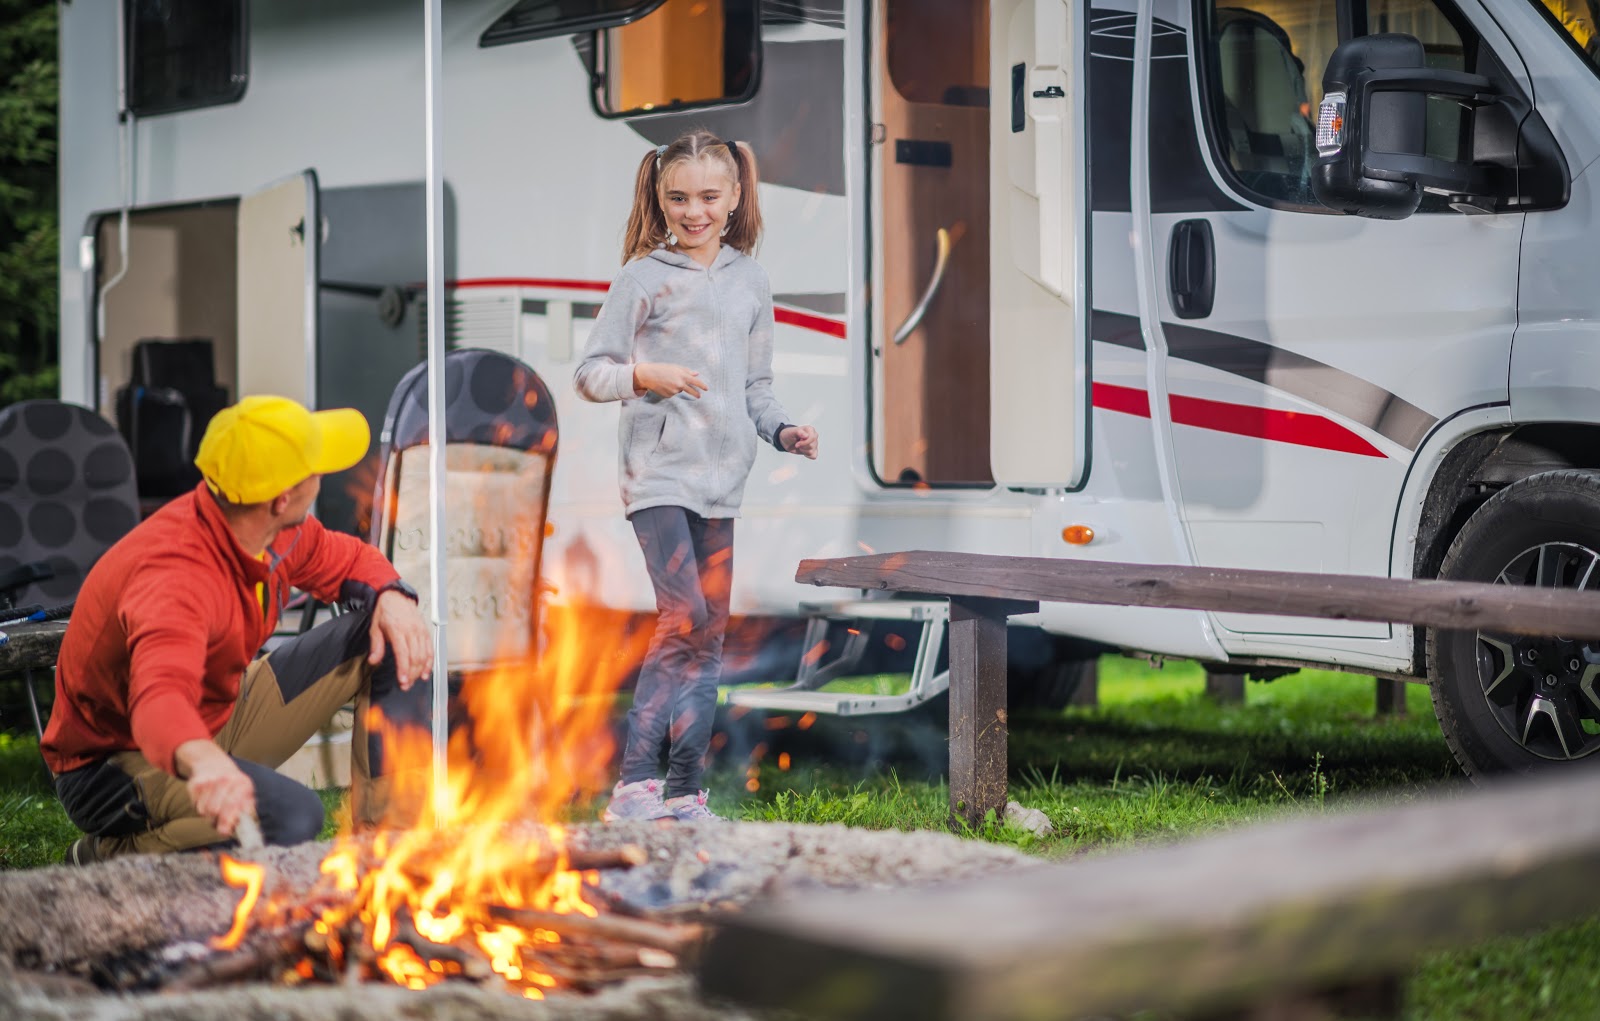 Family Time While RV Camping